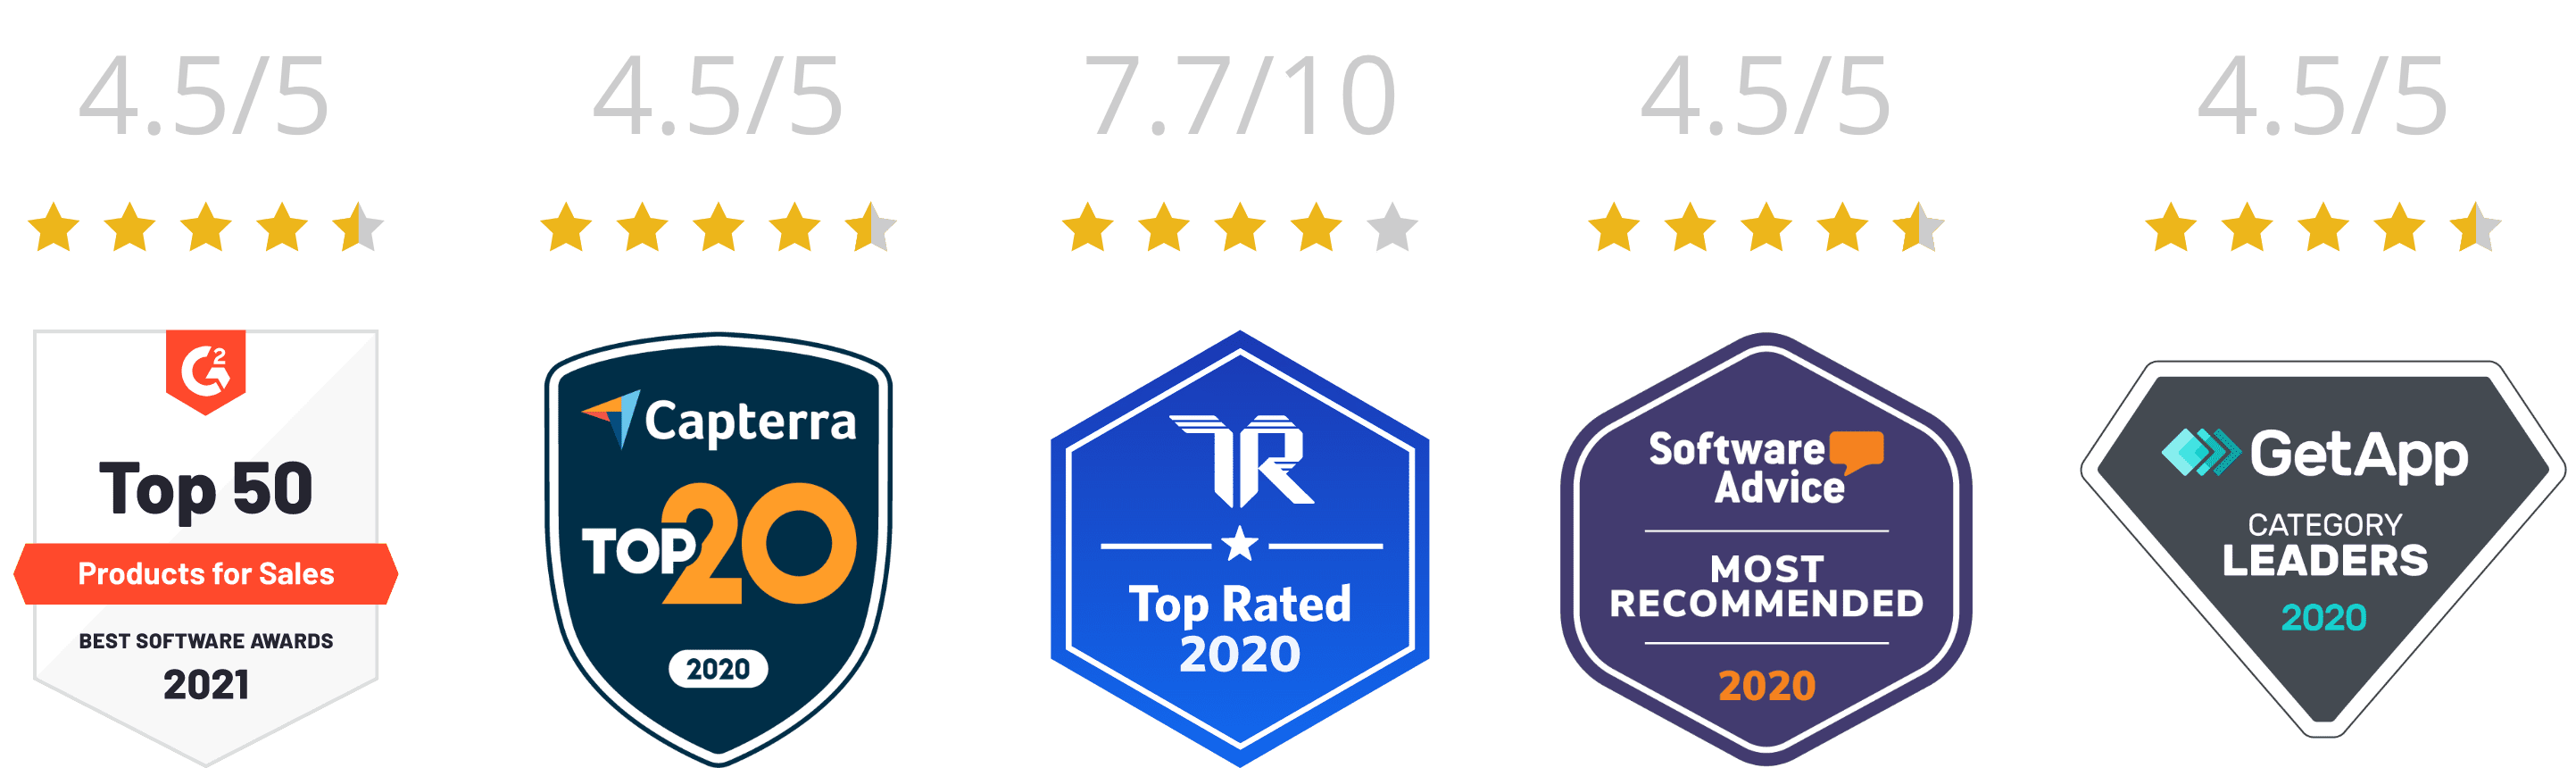 SharpSpring-Ratings-Badges-with-Ratings-April2021